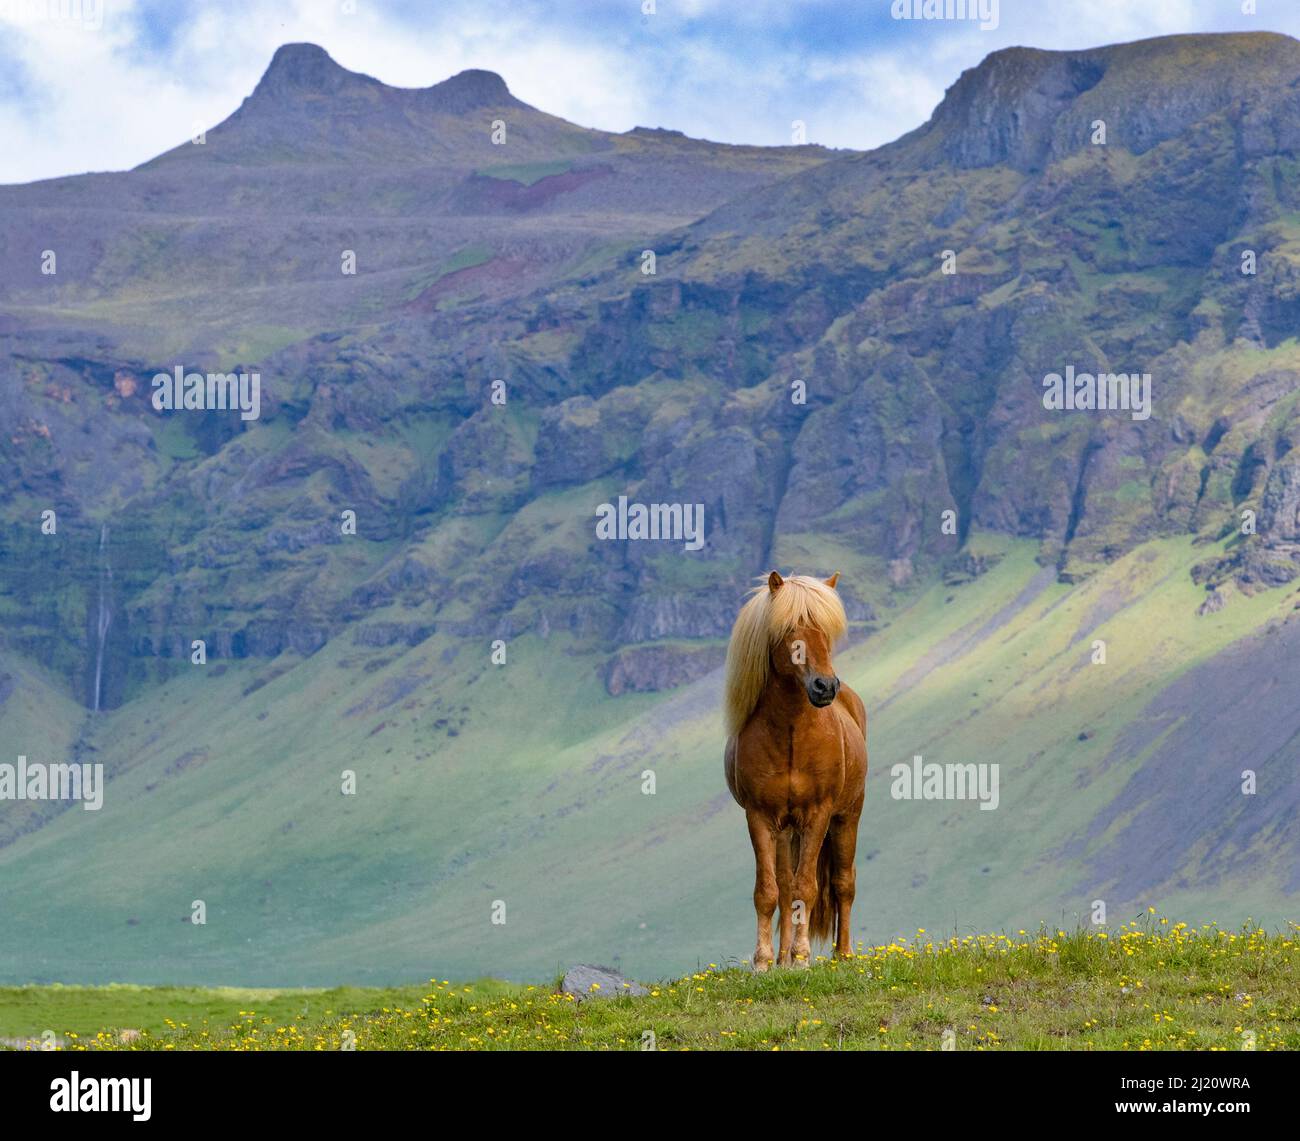 Icelandic horse standing in grassland, mountains in background. Southern Iceland. June. Stock Photo